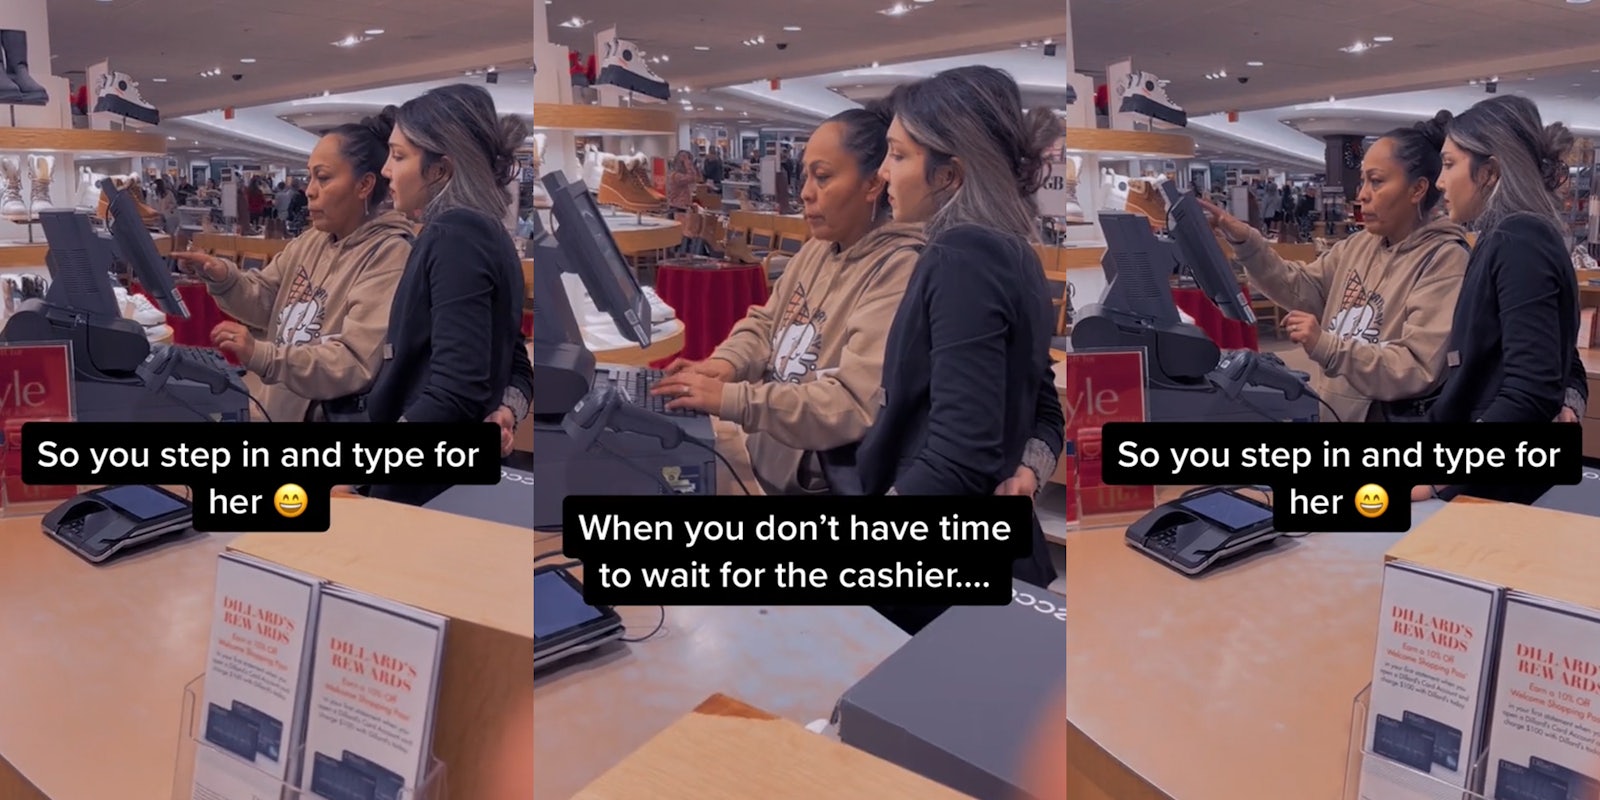 cashier and customer at register speaking as customer types caption 'So you step in and type for her' (l) cashier and customer at register speaking as customer types caption 'When you don't have time to wait for the cashier' (c) cashier and customer at register speaking as customer types caption 'So you step in and type for her' (r)